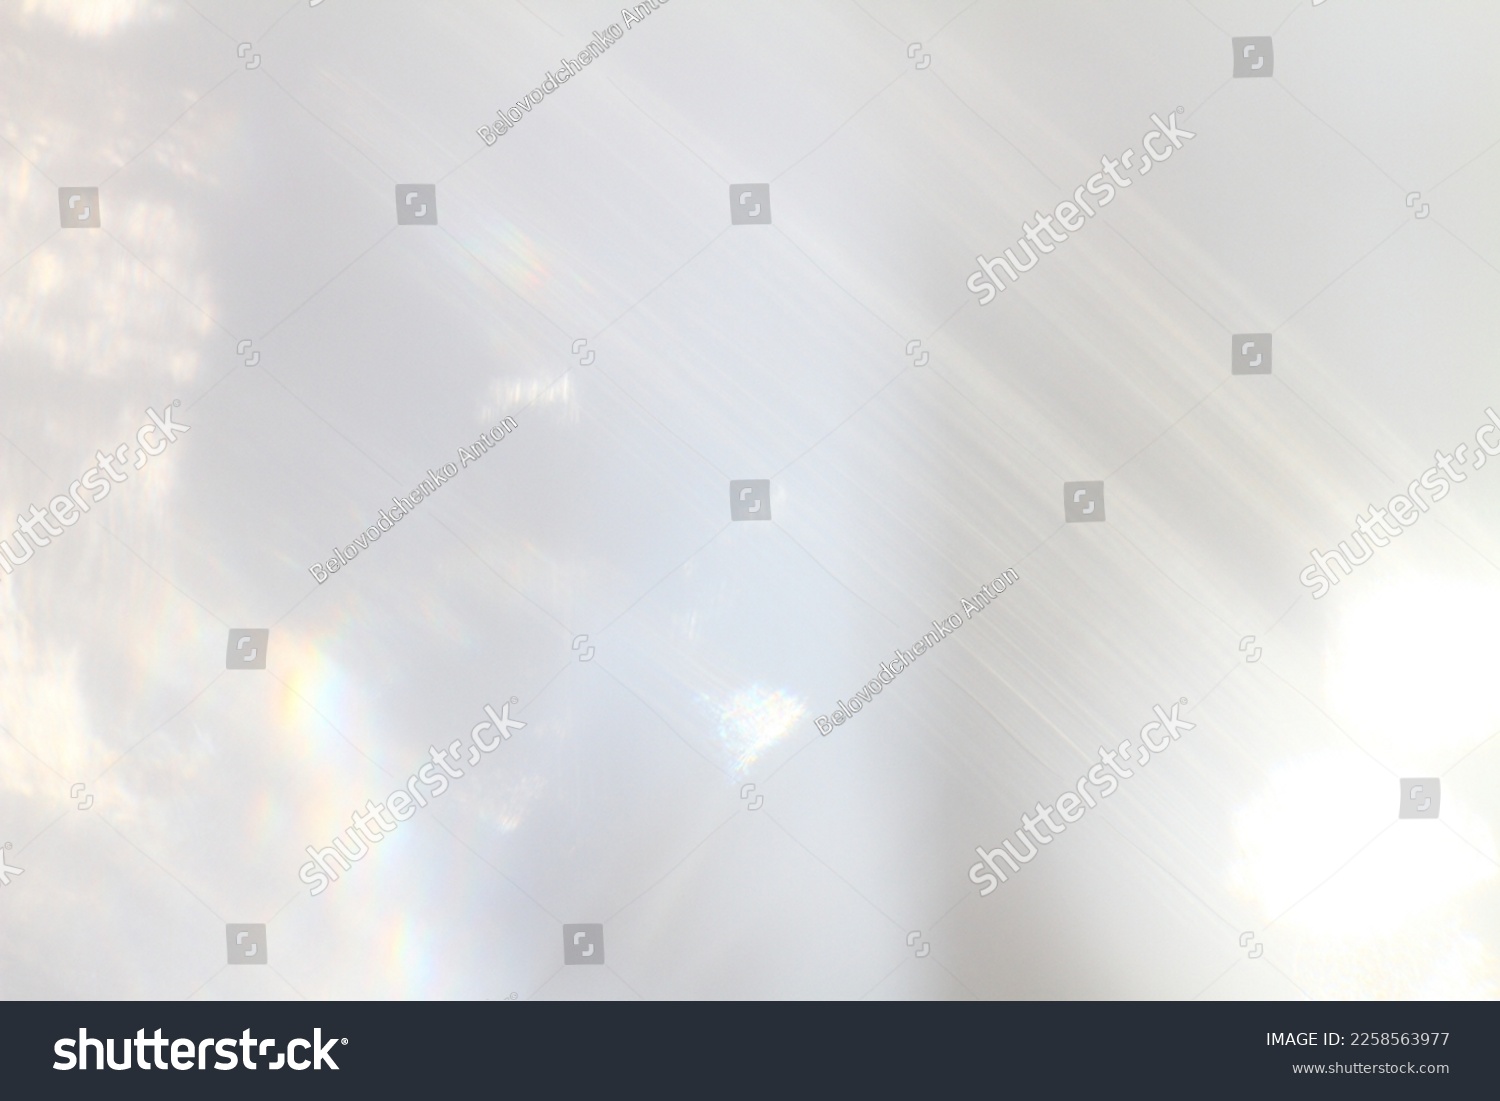 Abstract background - light flashes on grey background. #2258563977